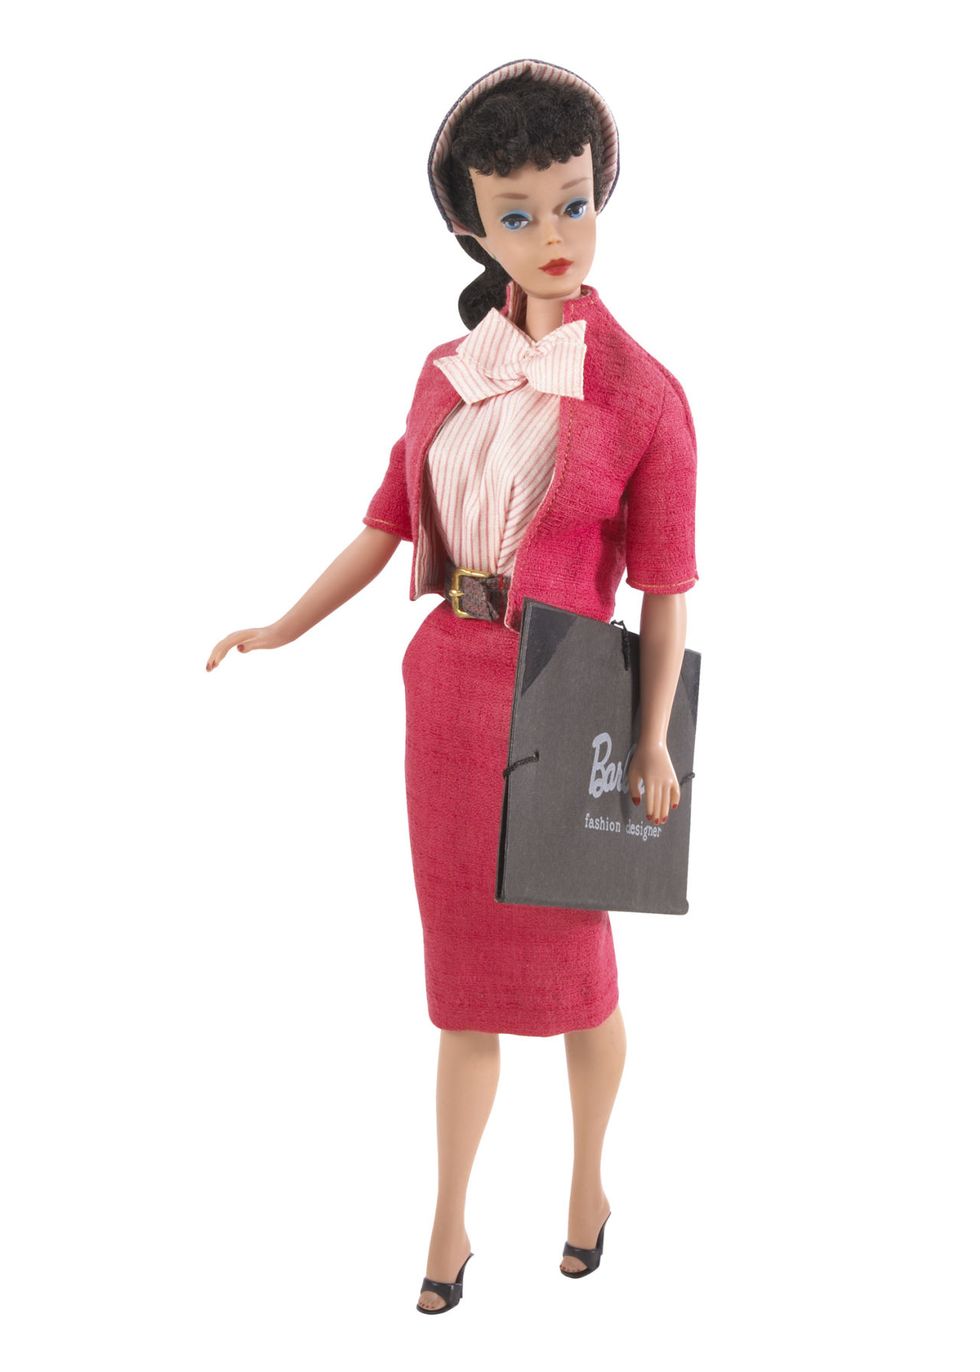 This Was the Most Popular Barbie Doll The Year You Were Born